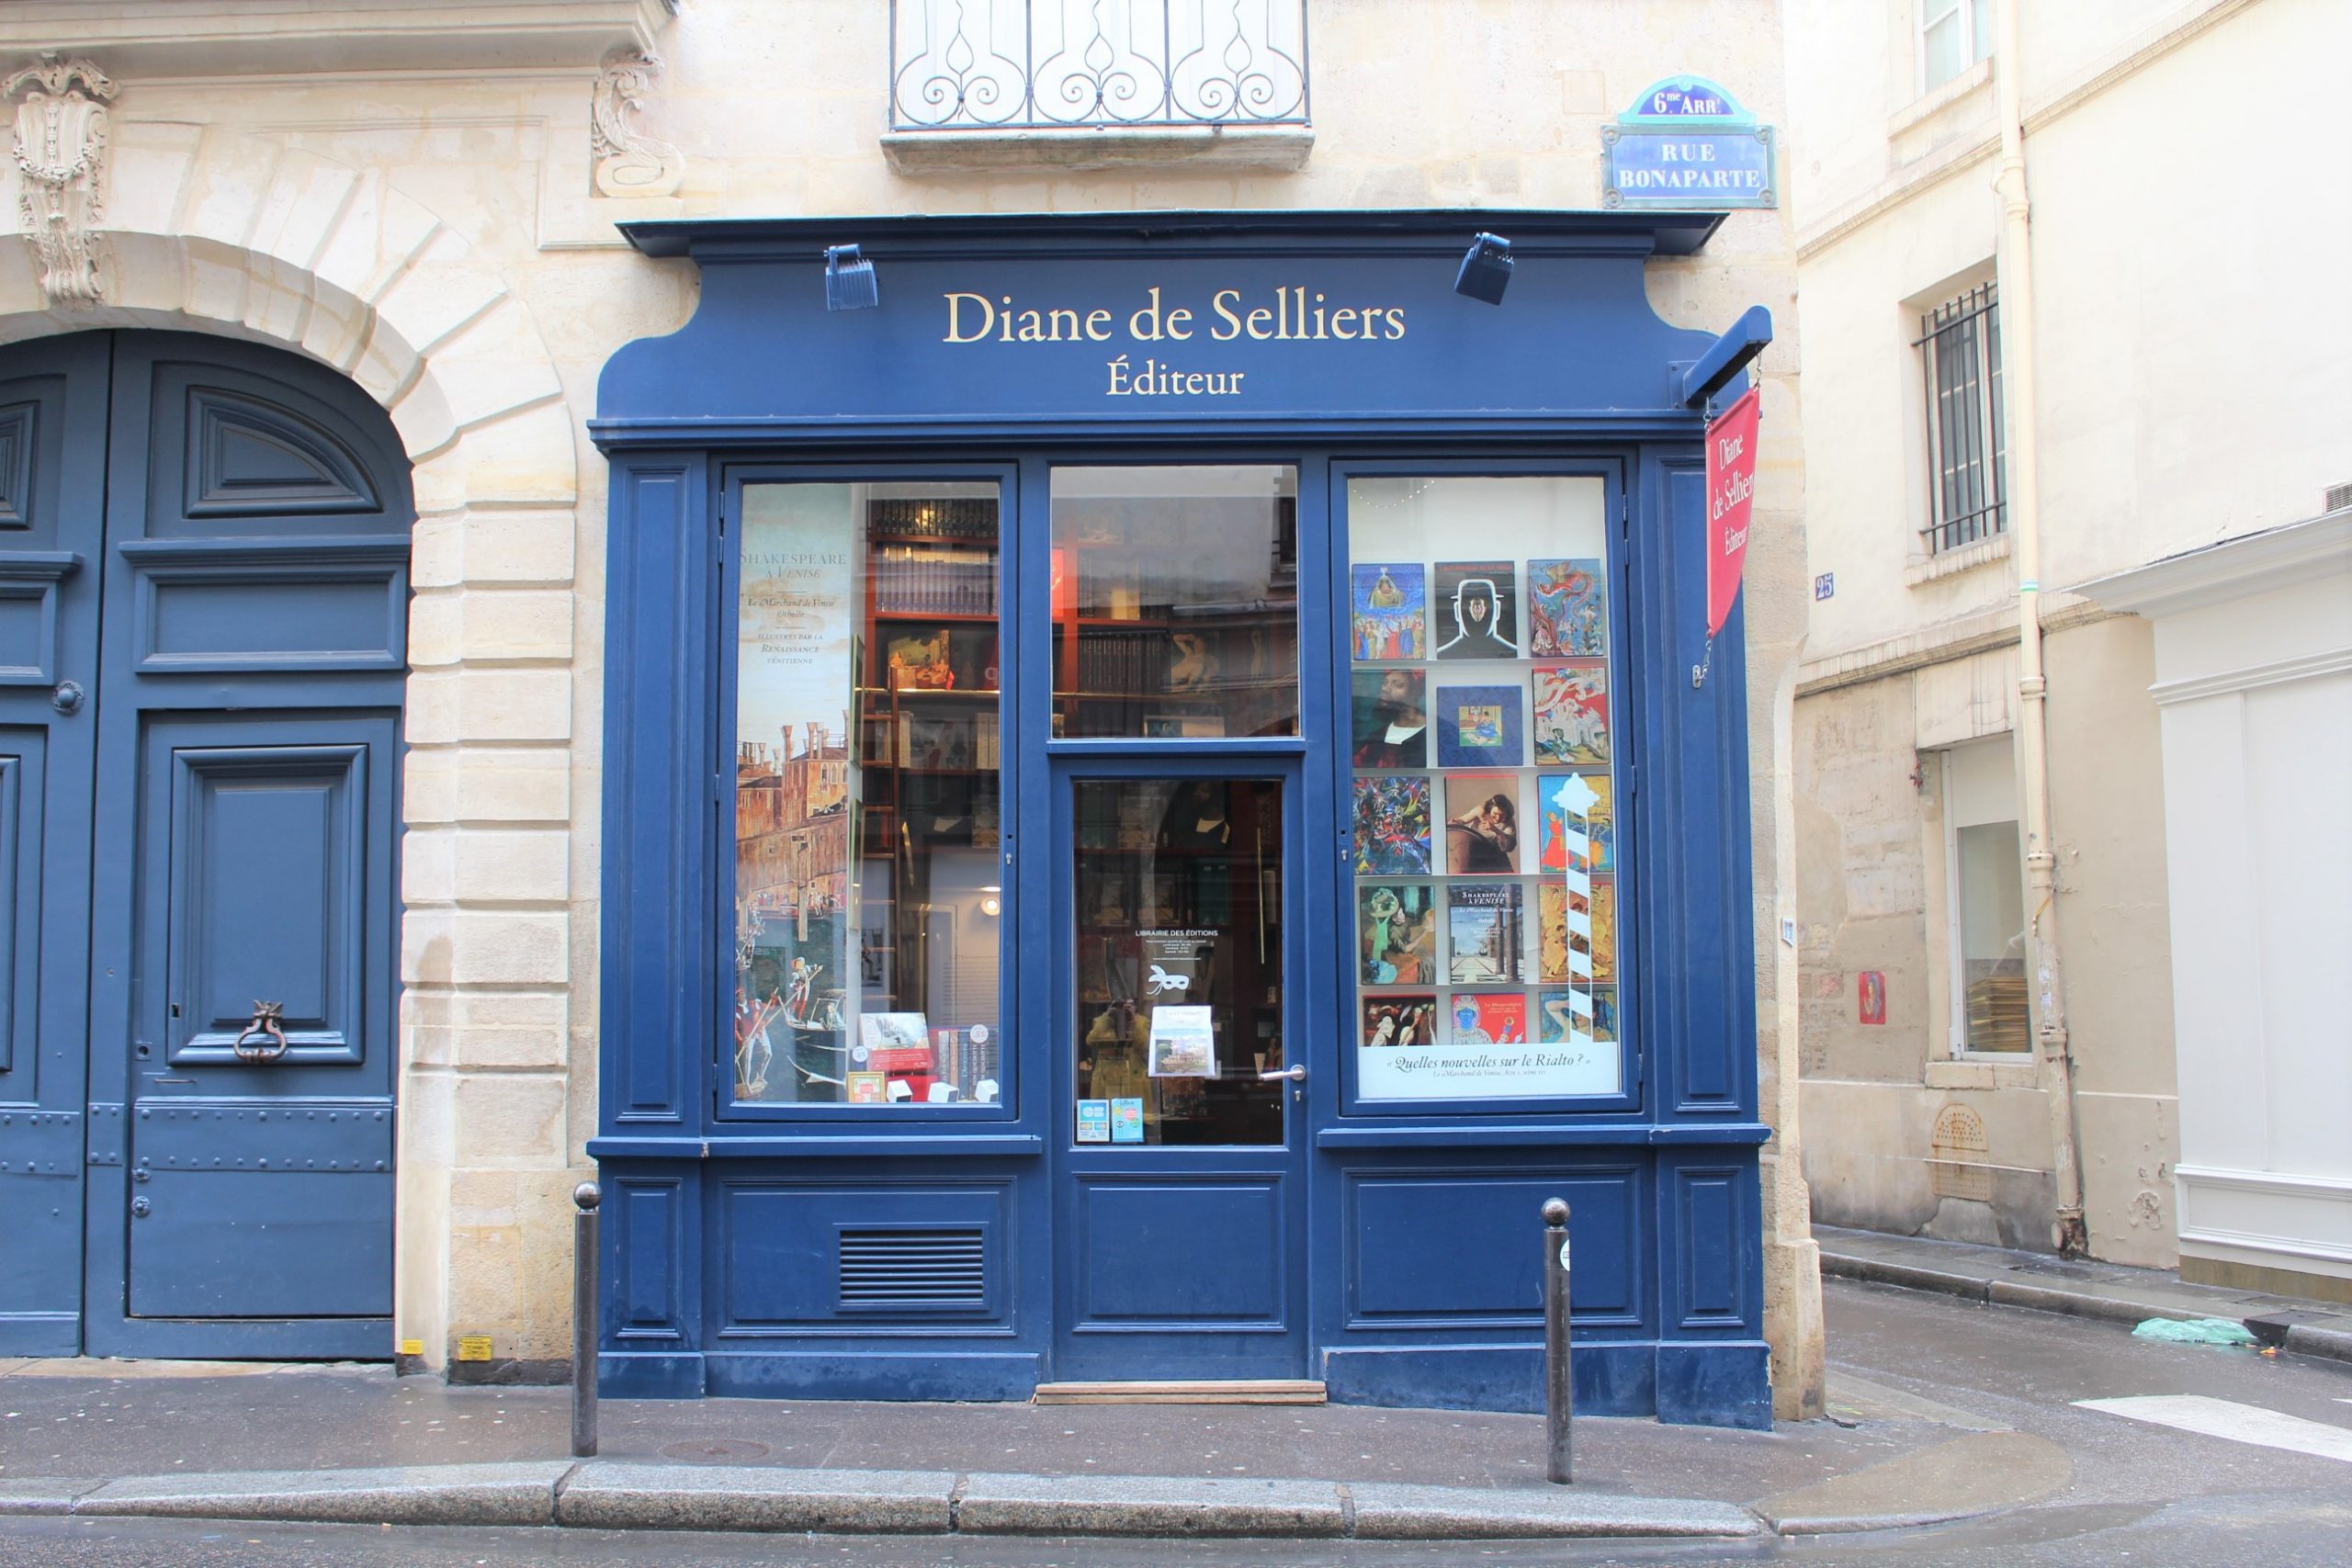 Editions Diane de Selliers